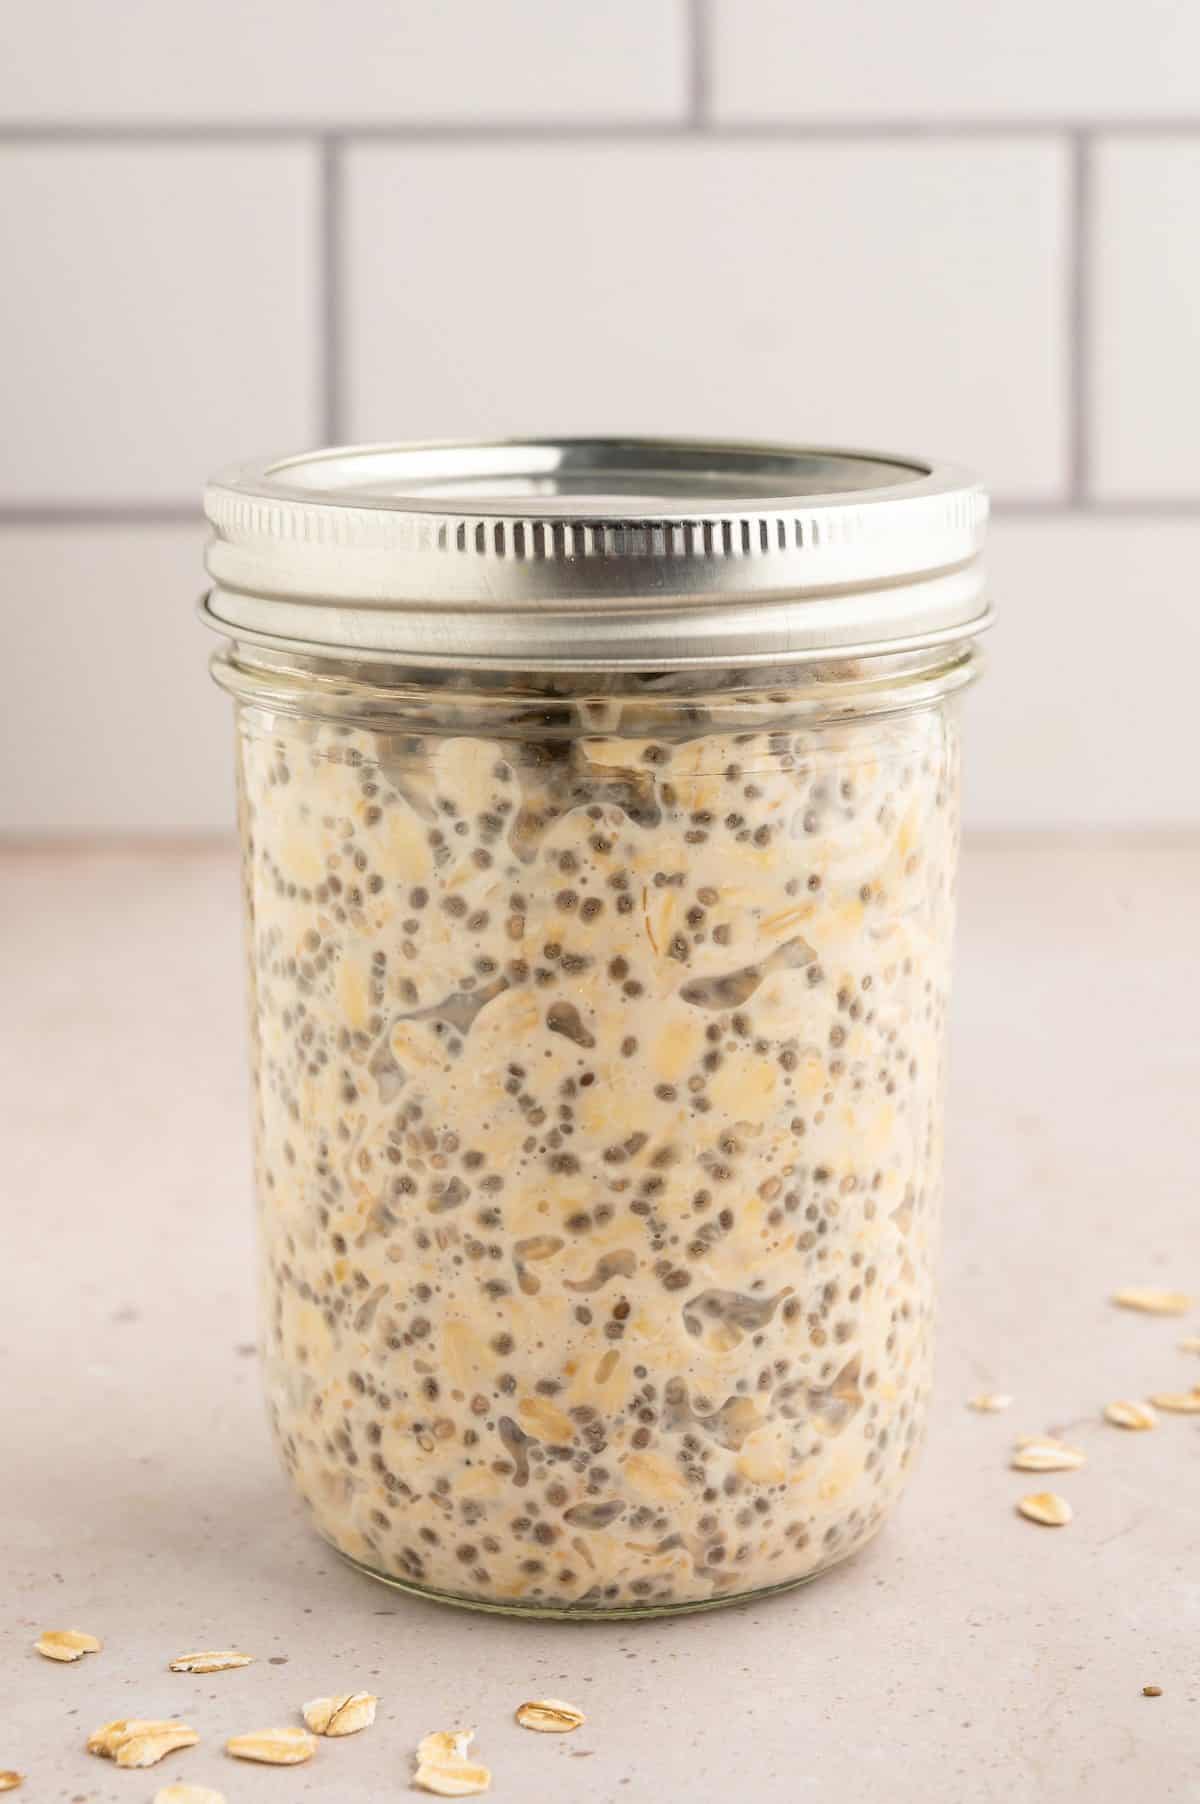 Overnight oats after it has thickened overnight.